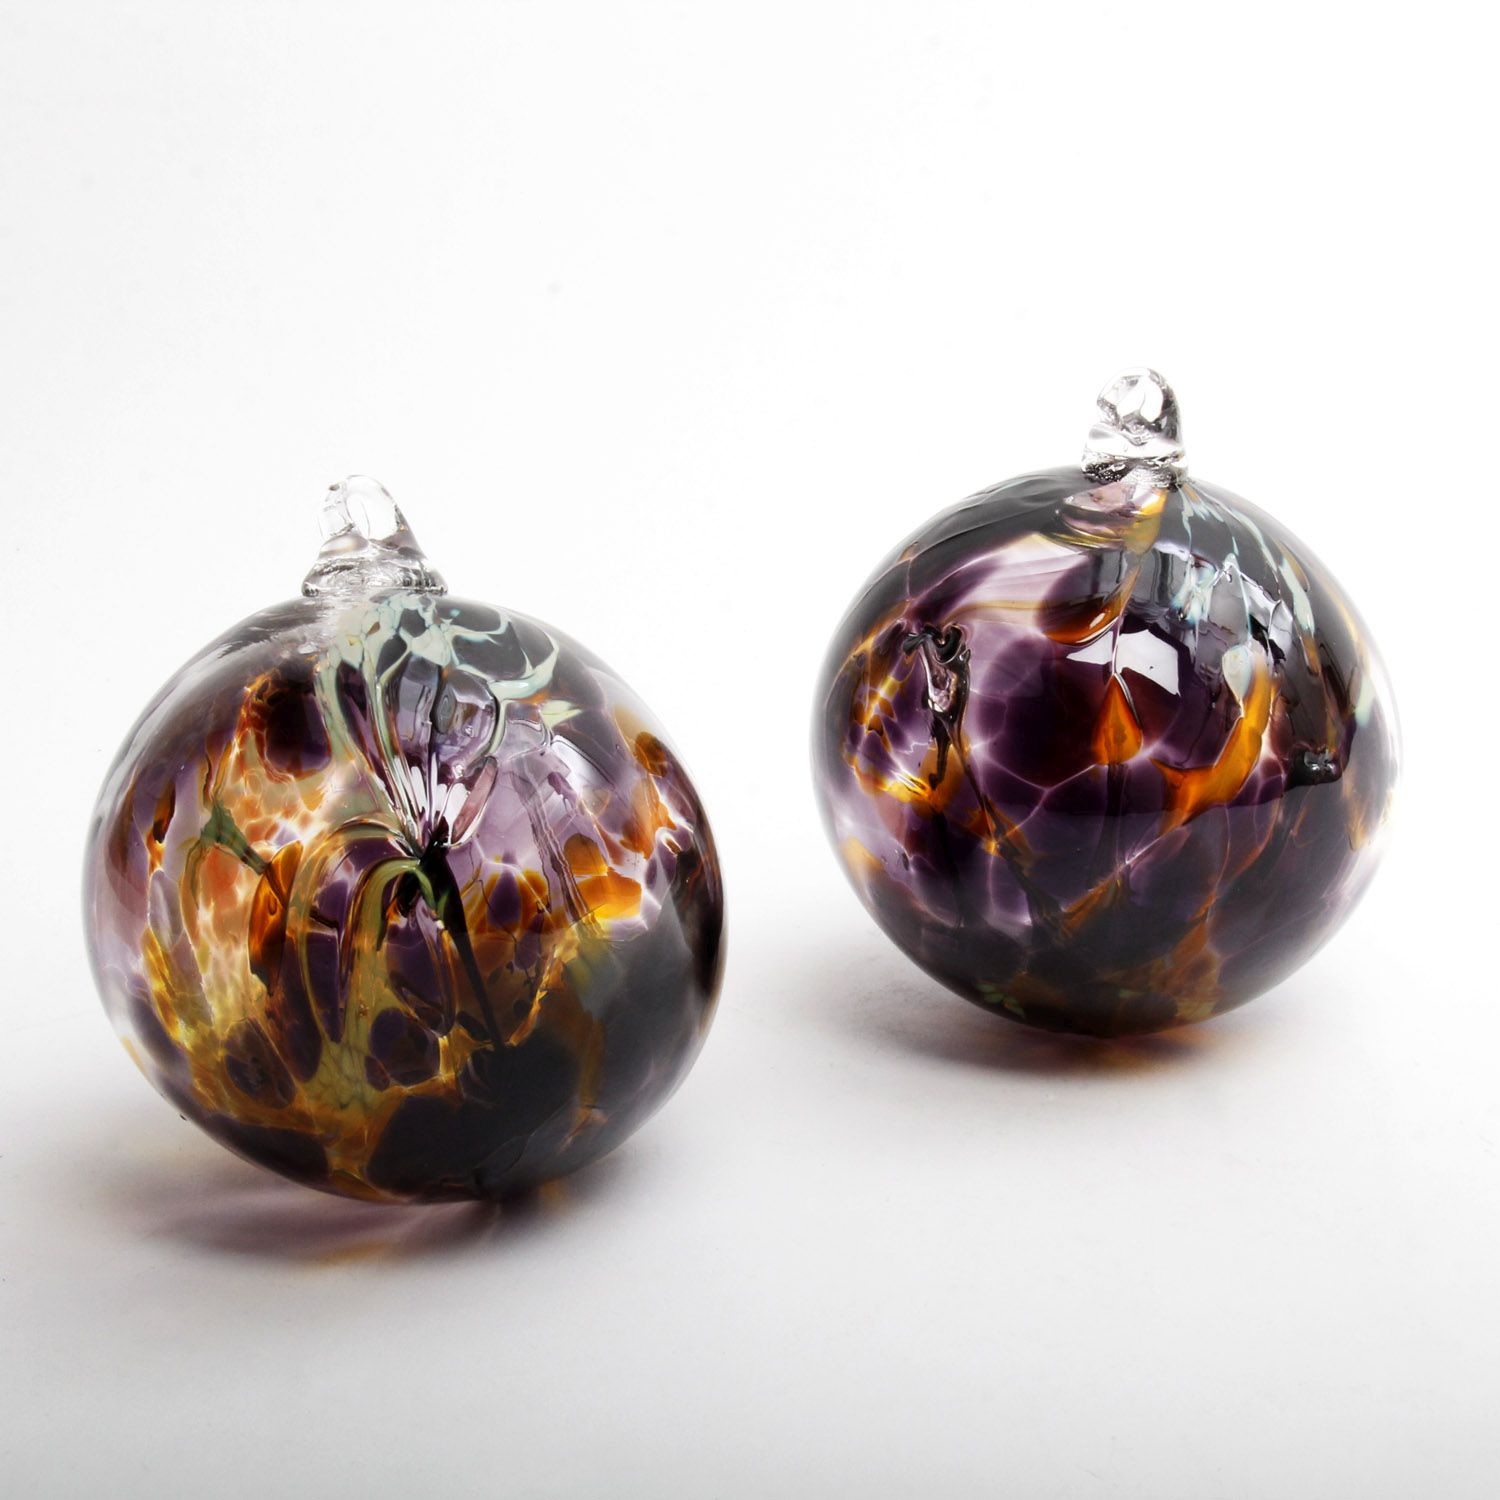 Gordon Boyd: Small Witchball – Elderberry Product Image 2 of 3